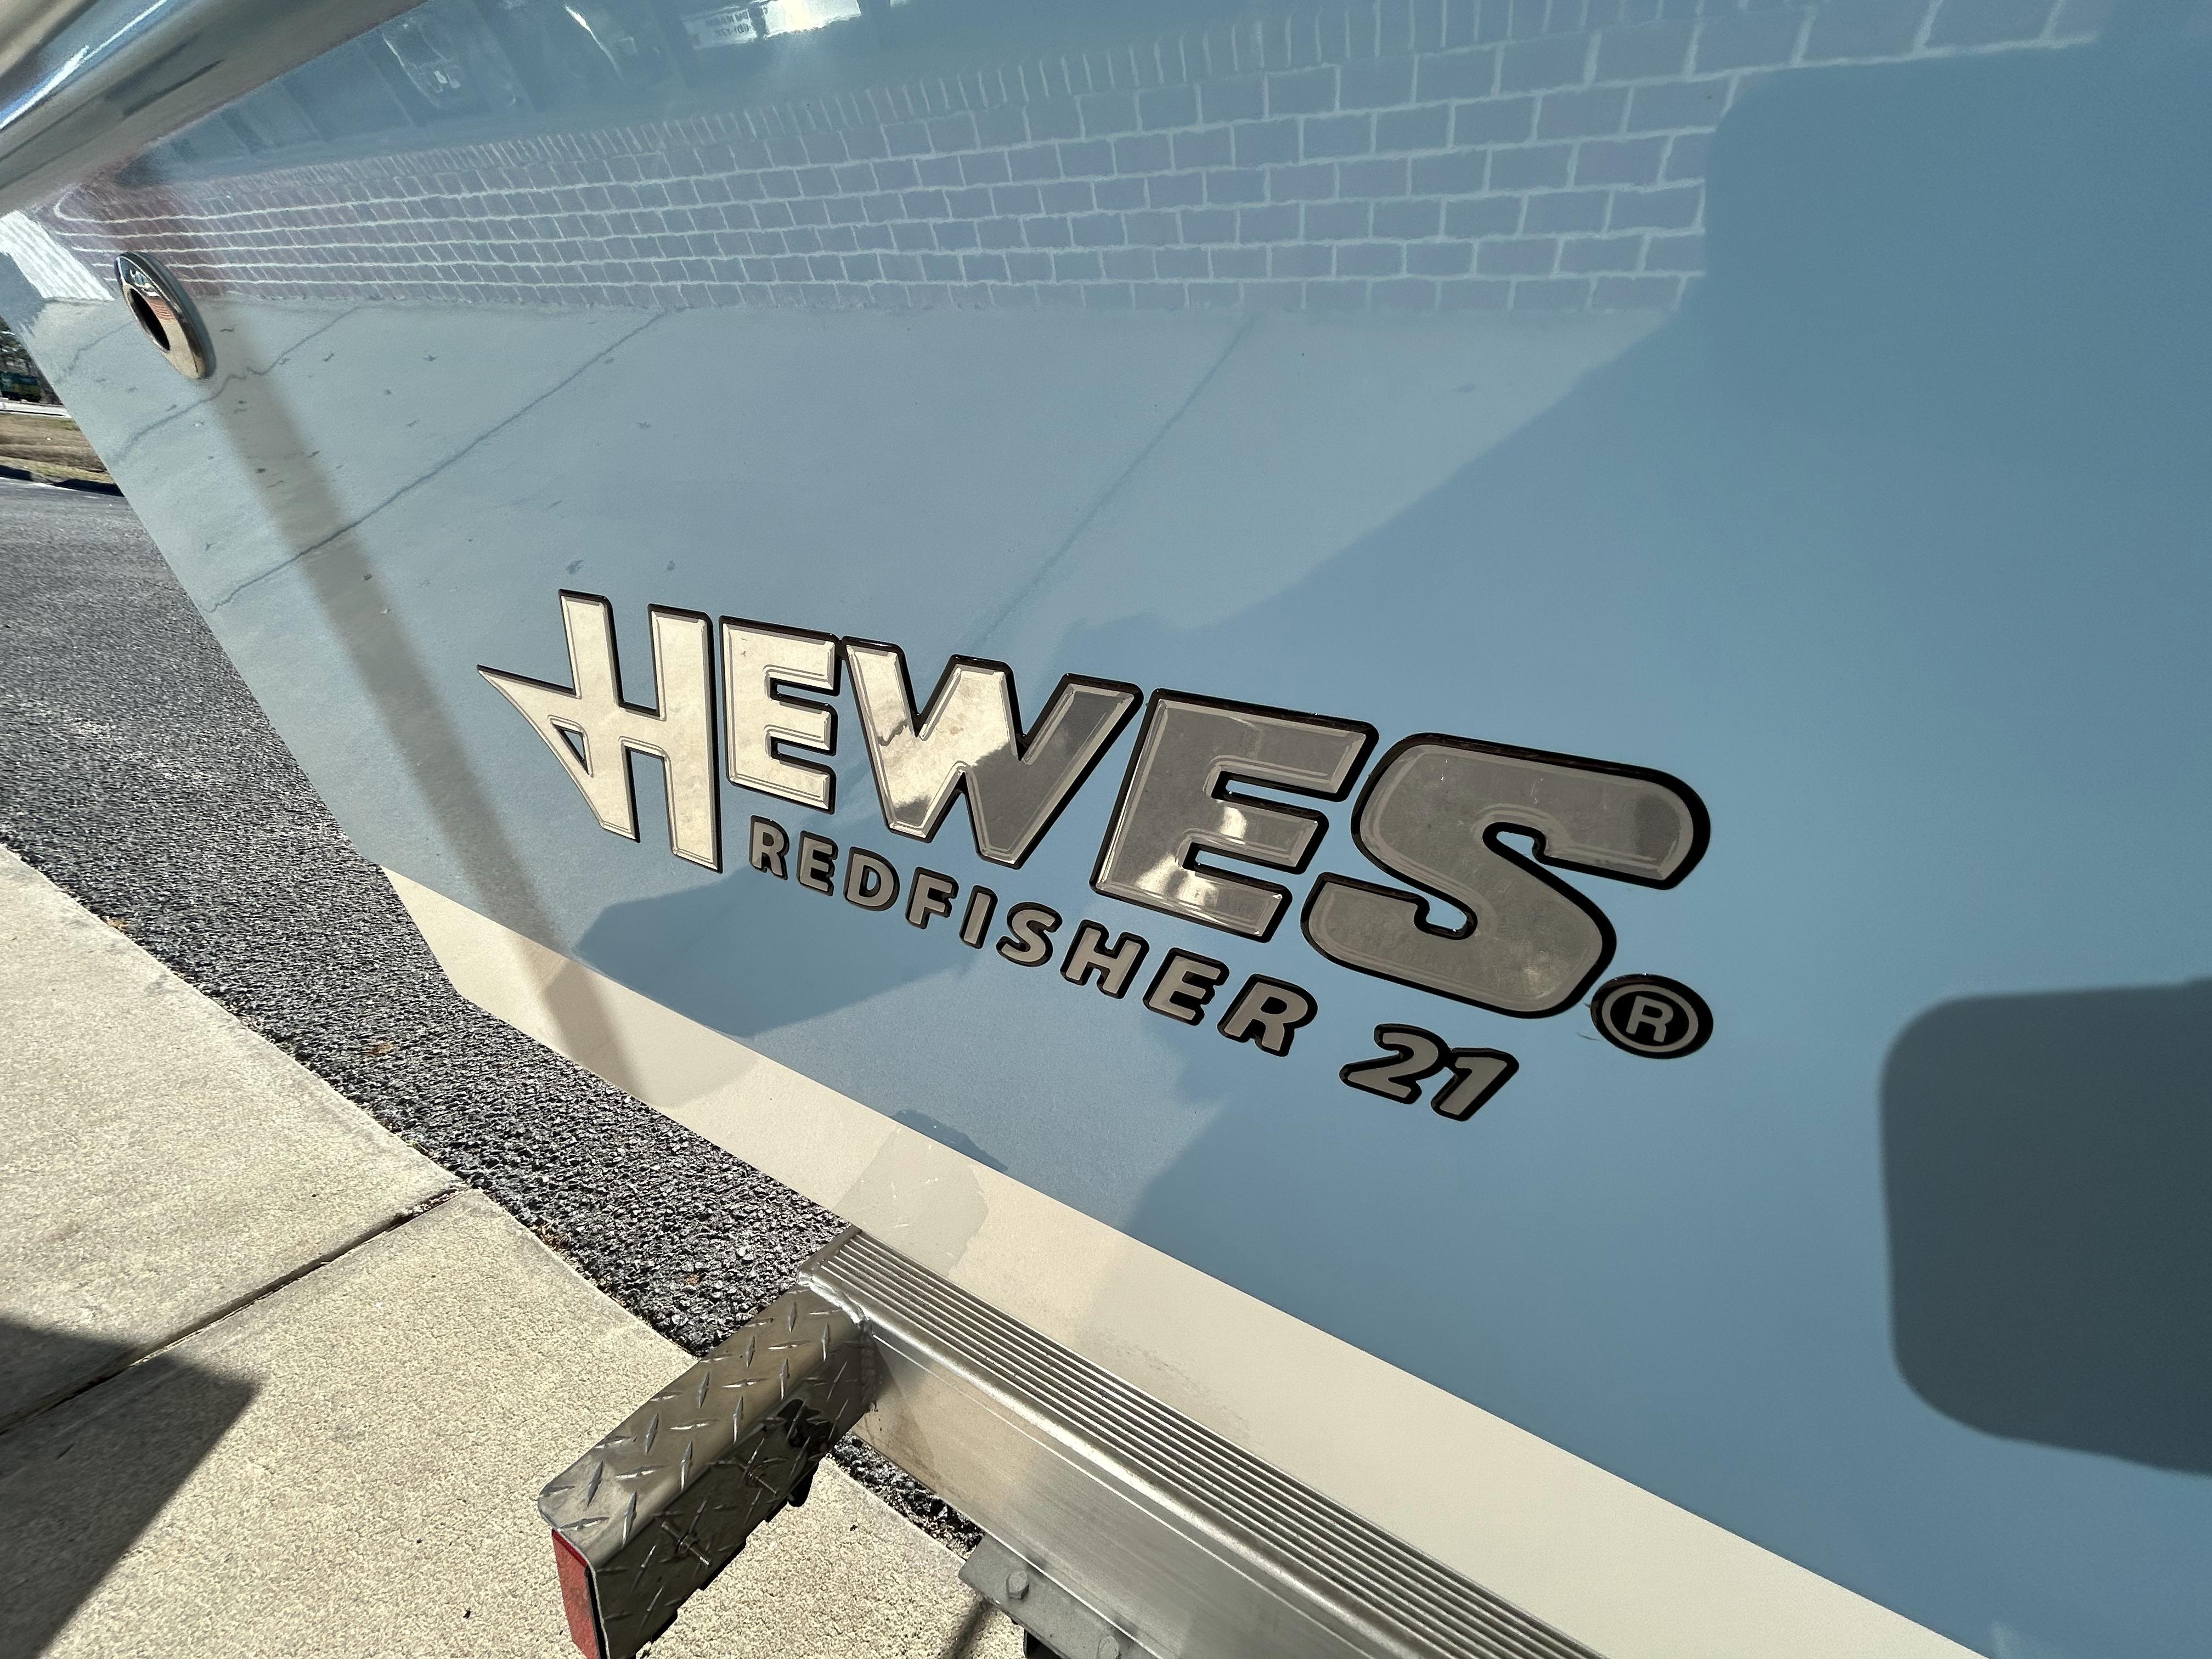 2024 Hewes Redfisher 21